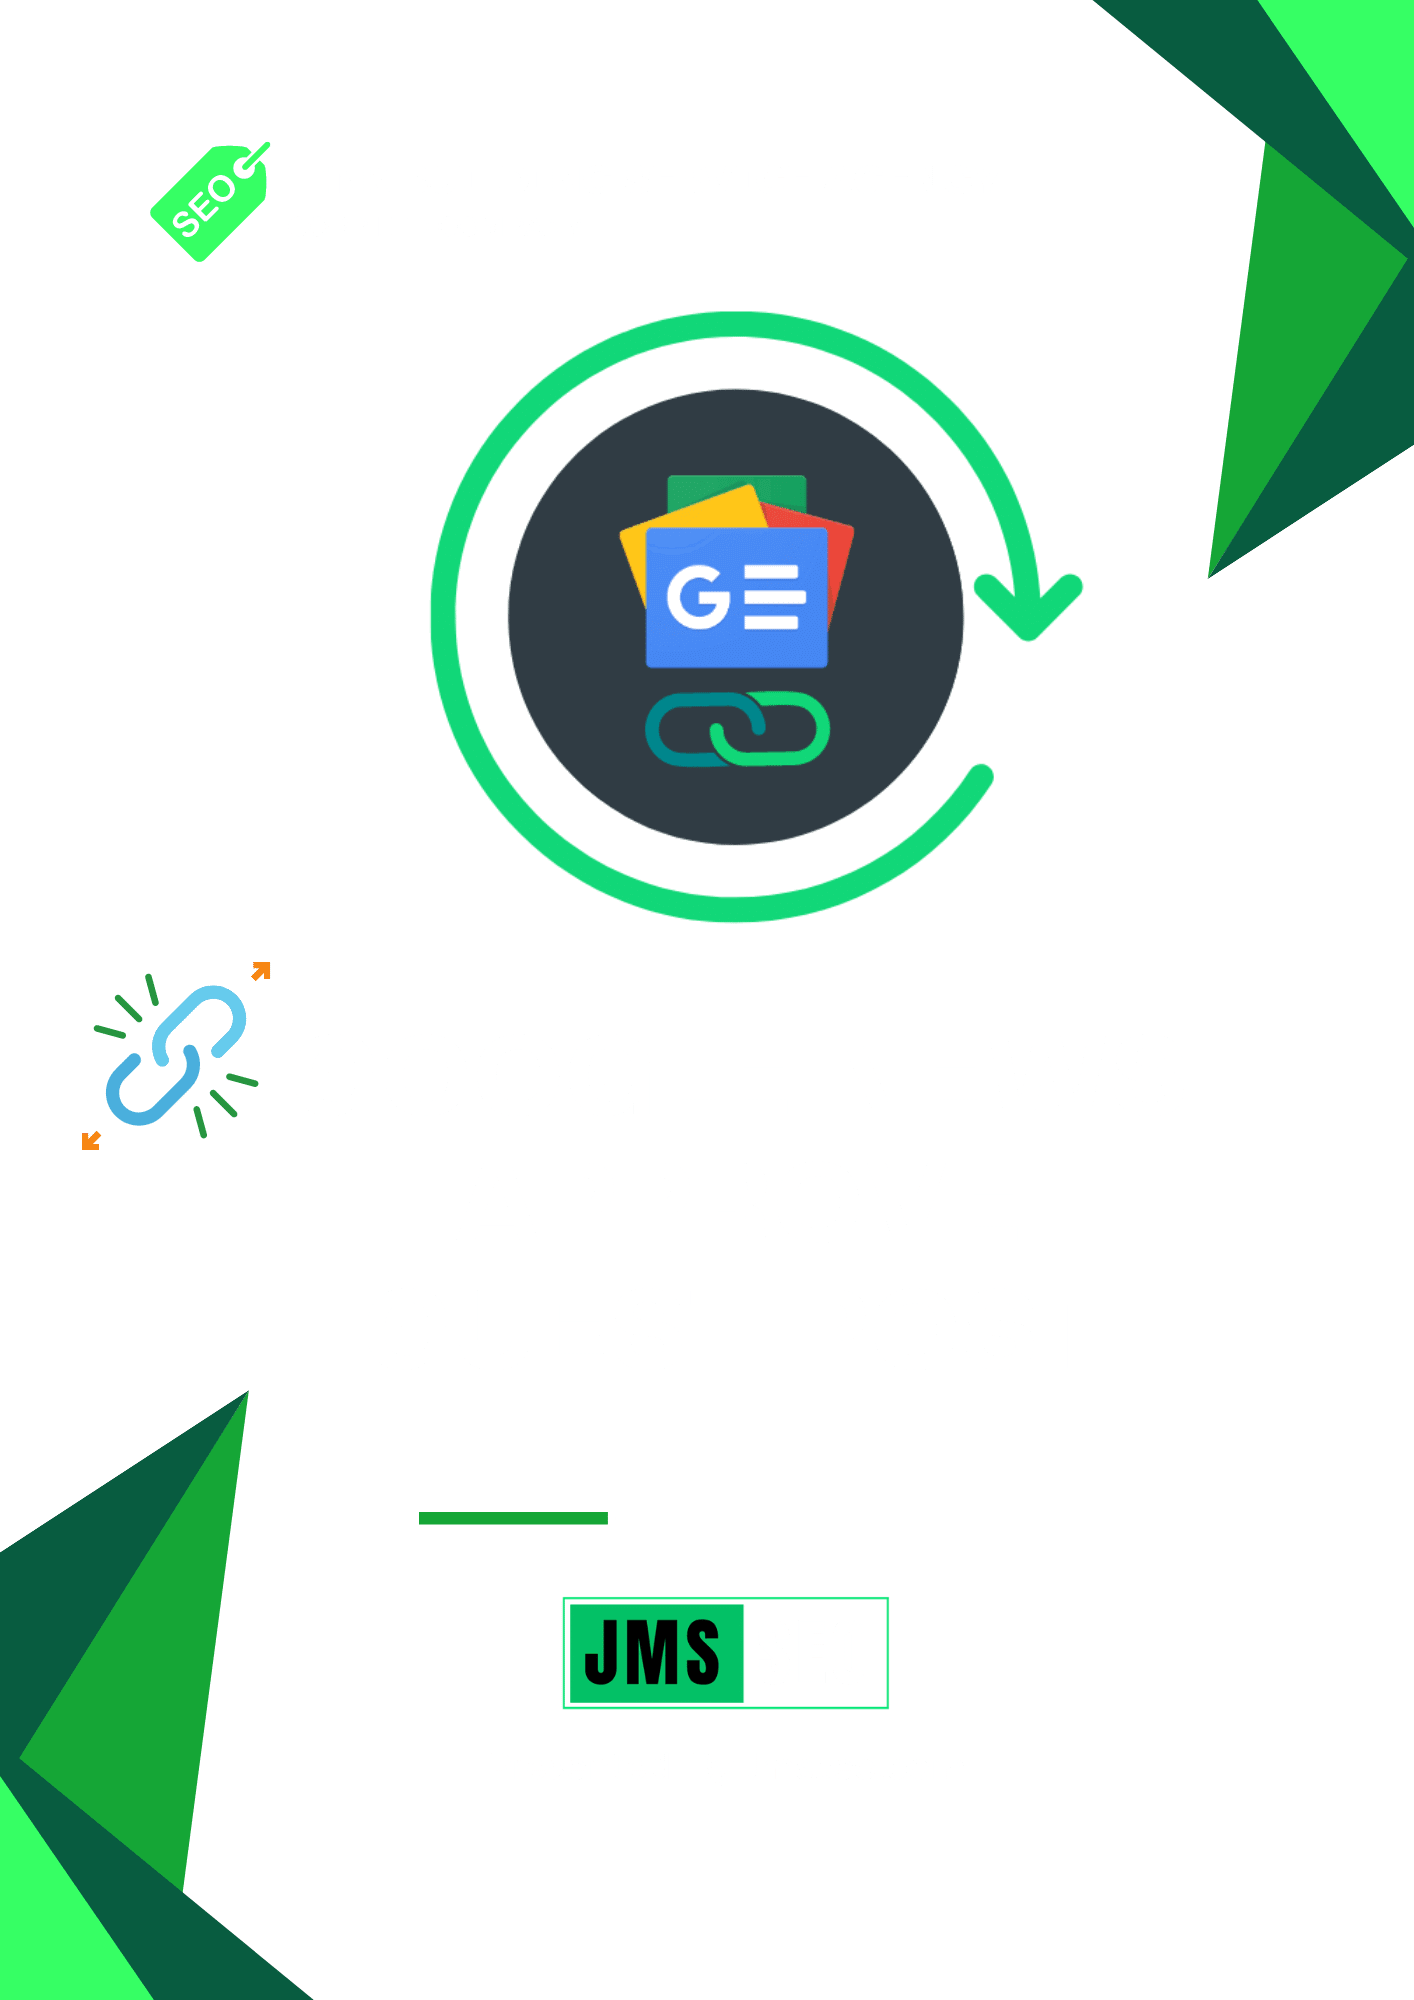 Google News Approve Guest Post